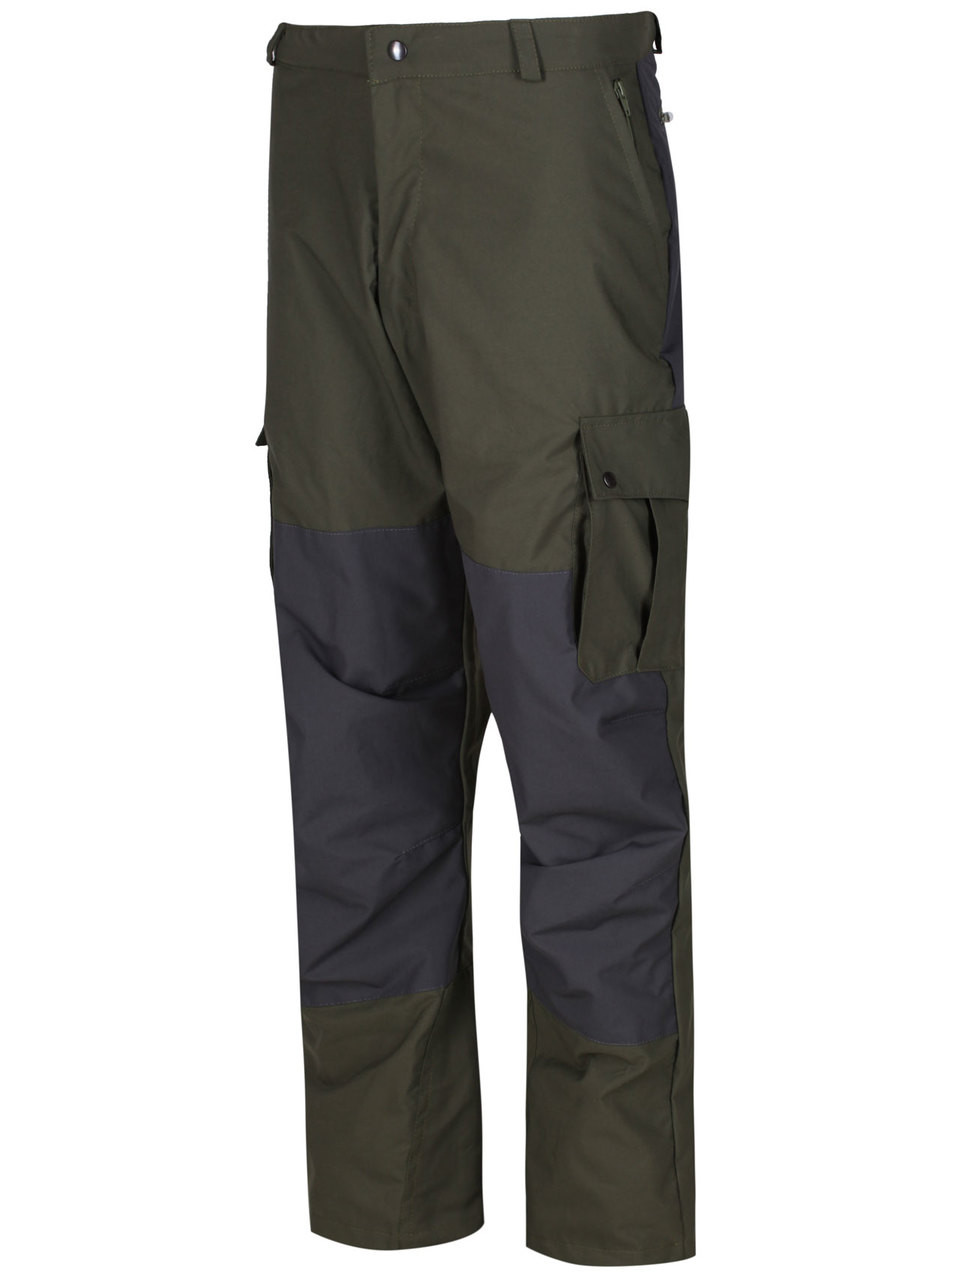 Blaven Trousers in Double Ventile® - fully waterproof, tough ...